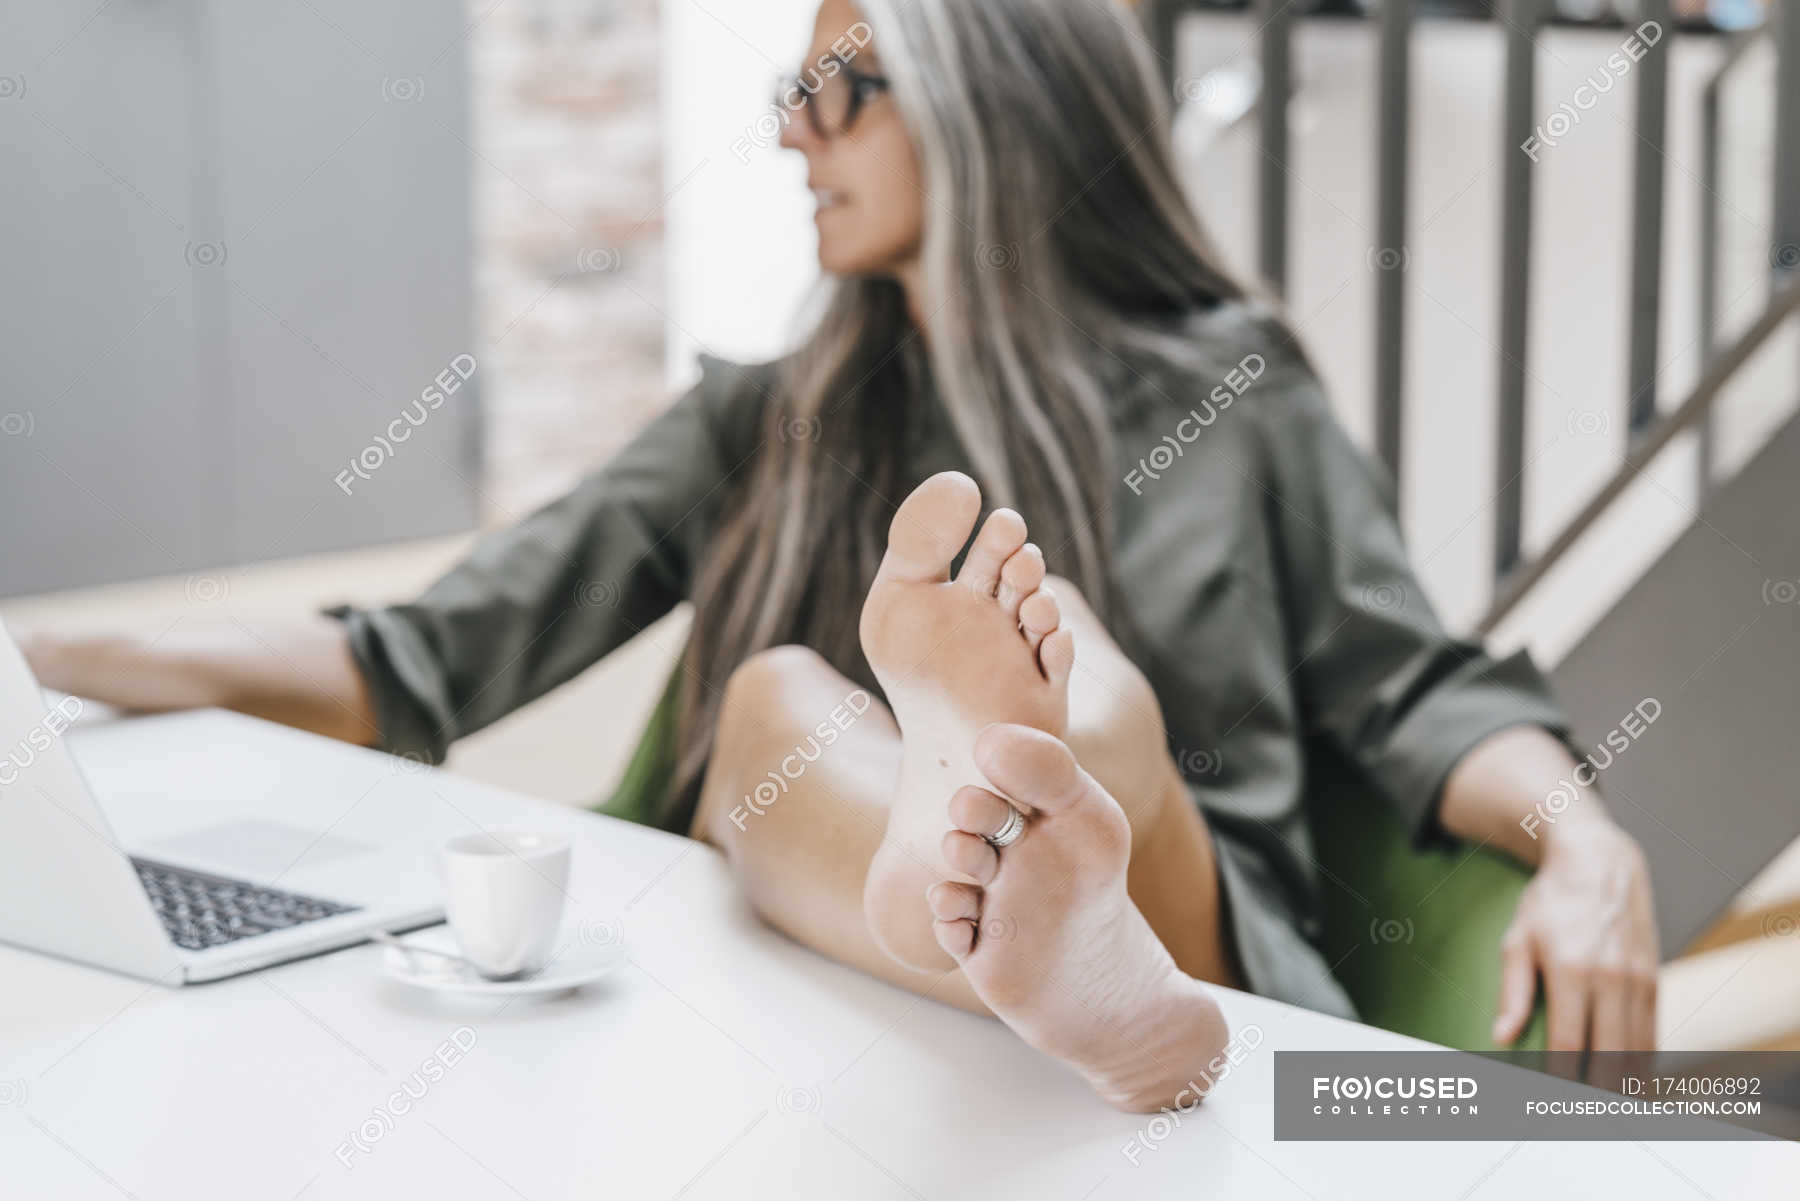 Focused 174006892 Stock Photo Woman Working Office Bare Feet 